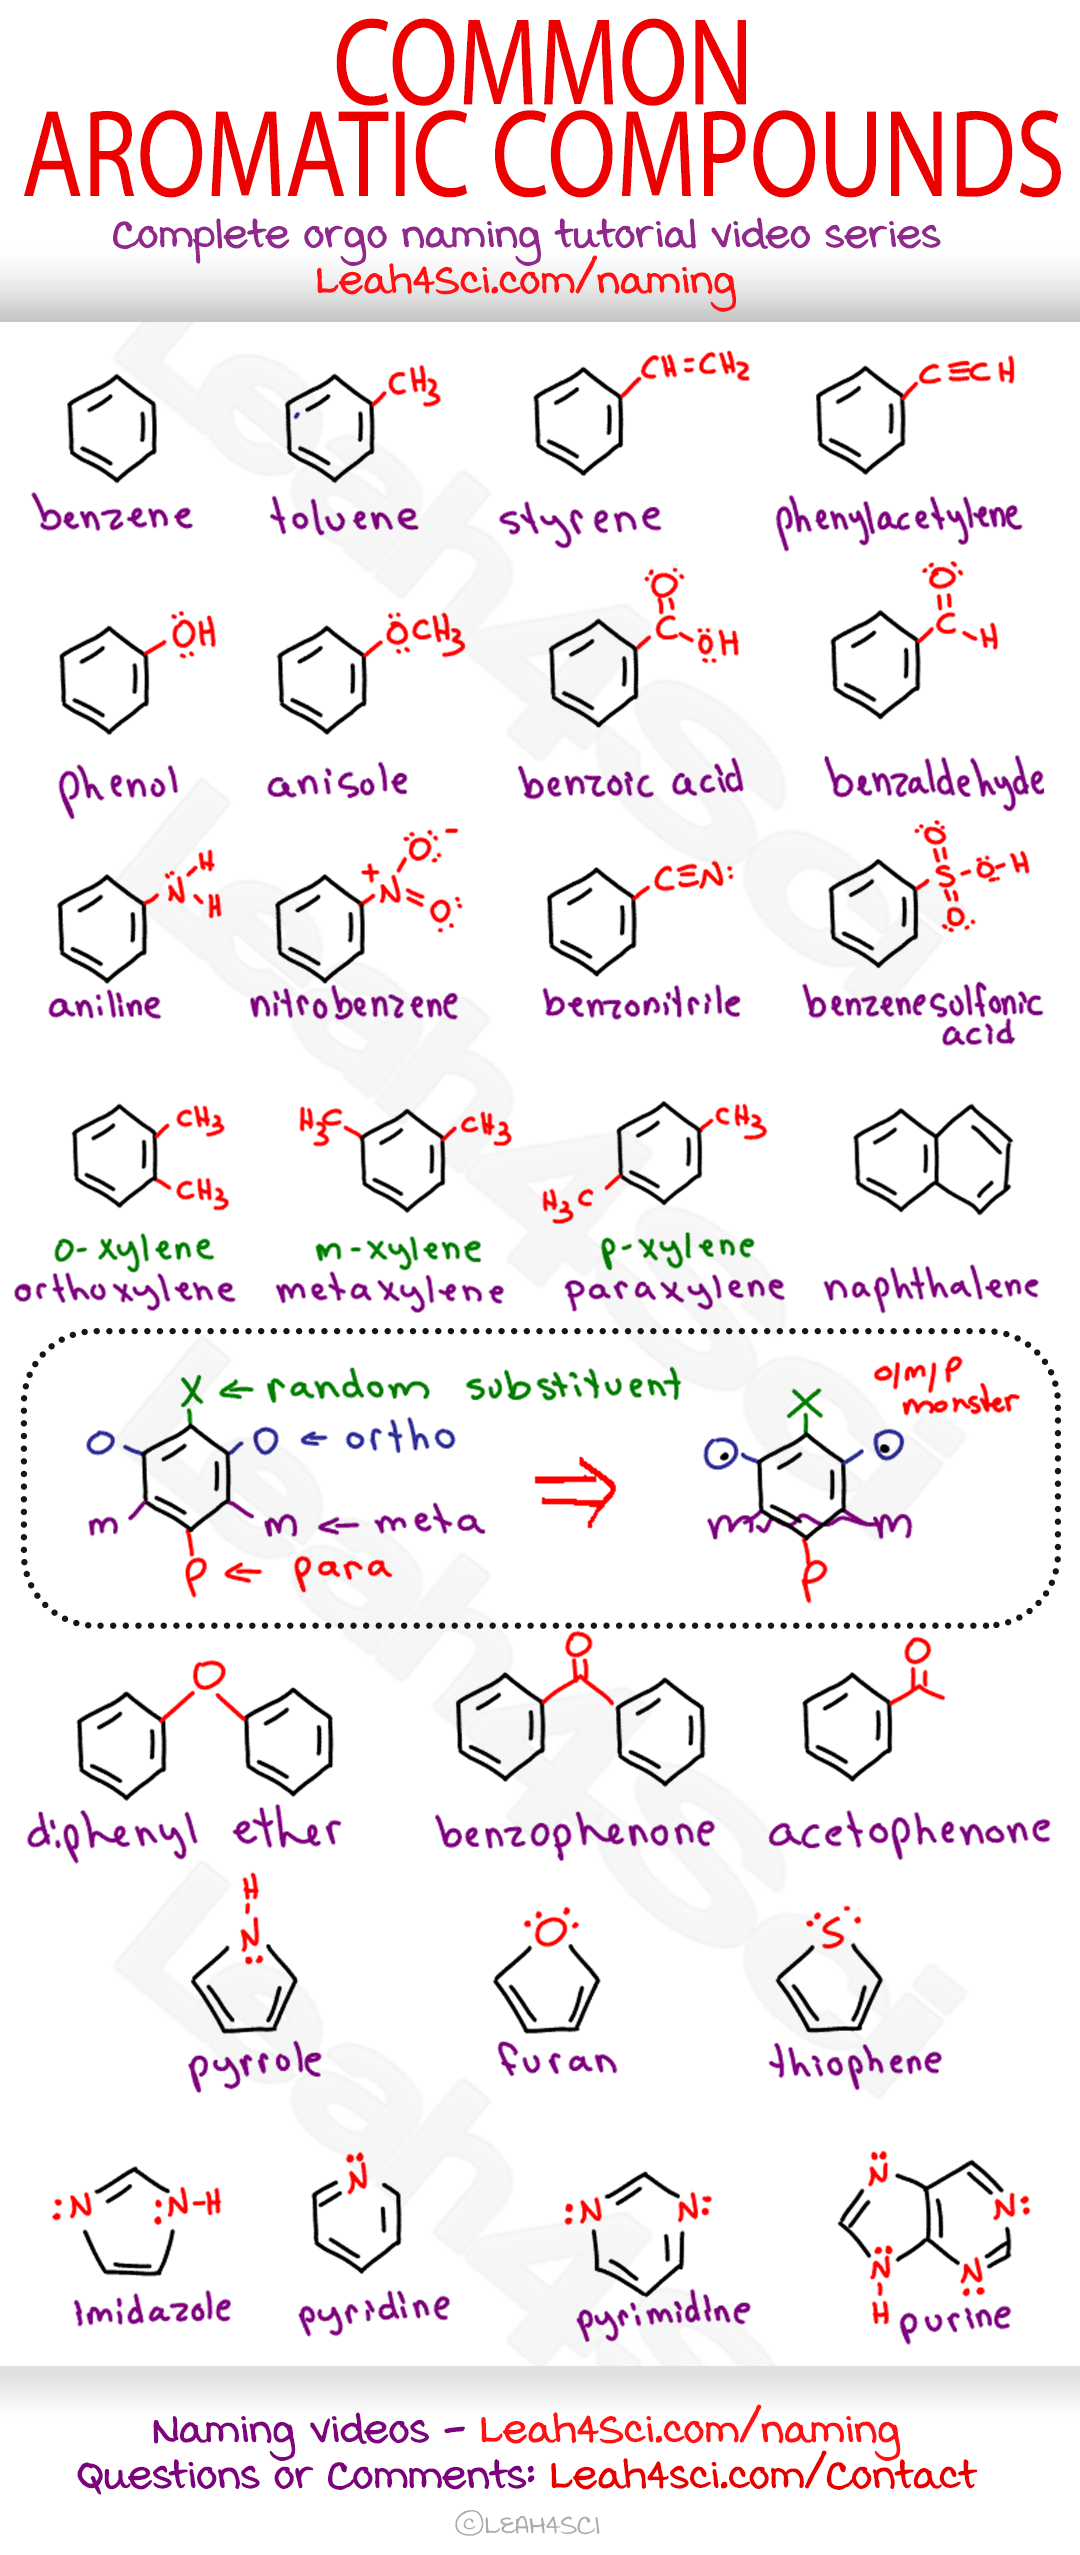 aromatic-compounds-study-guide-cheat-sheet